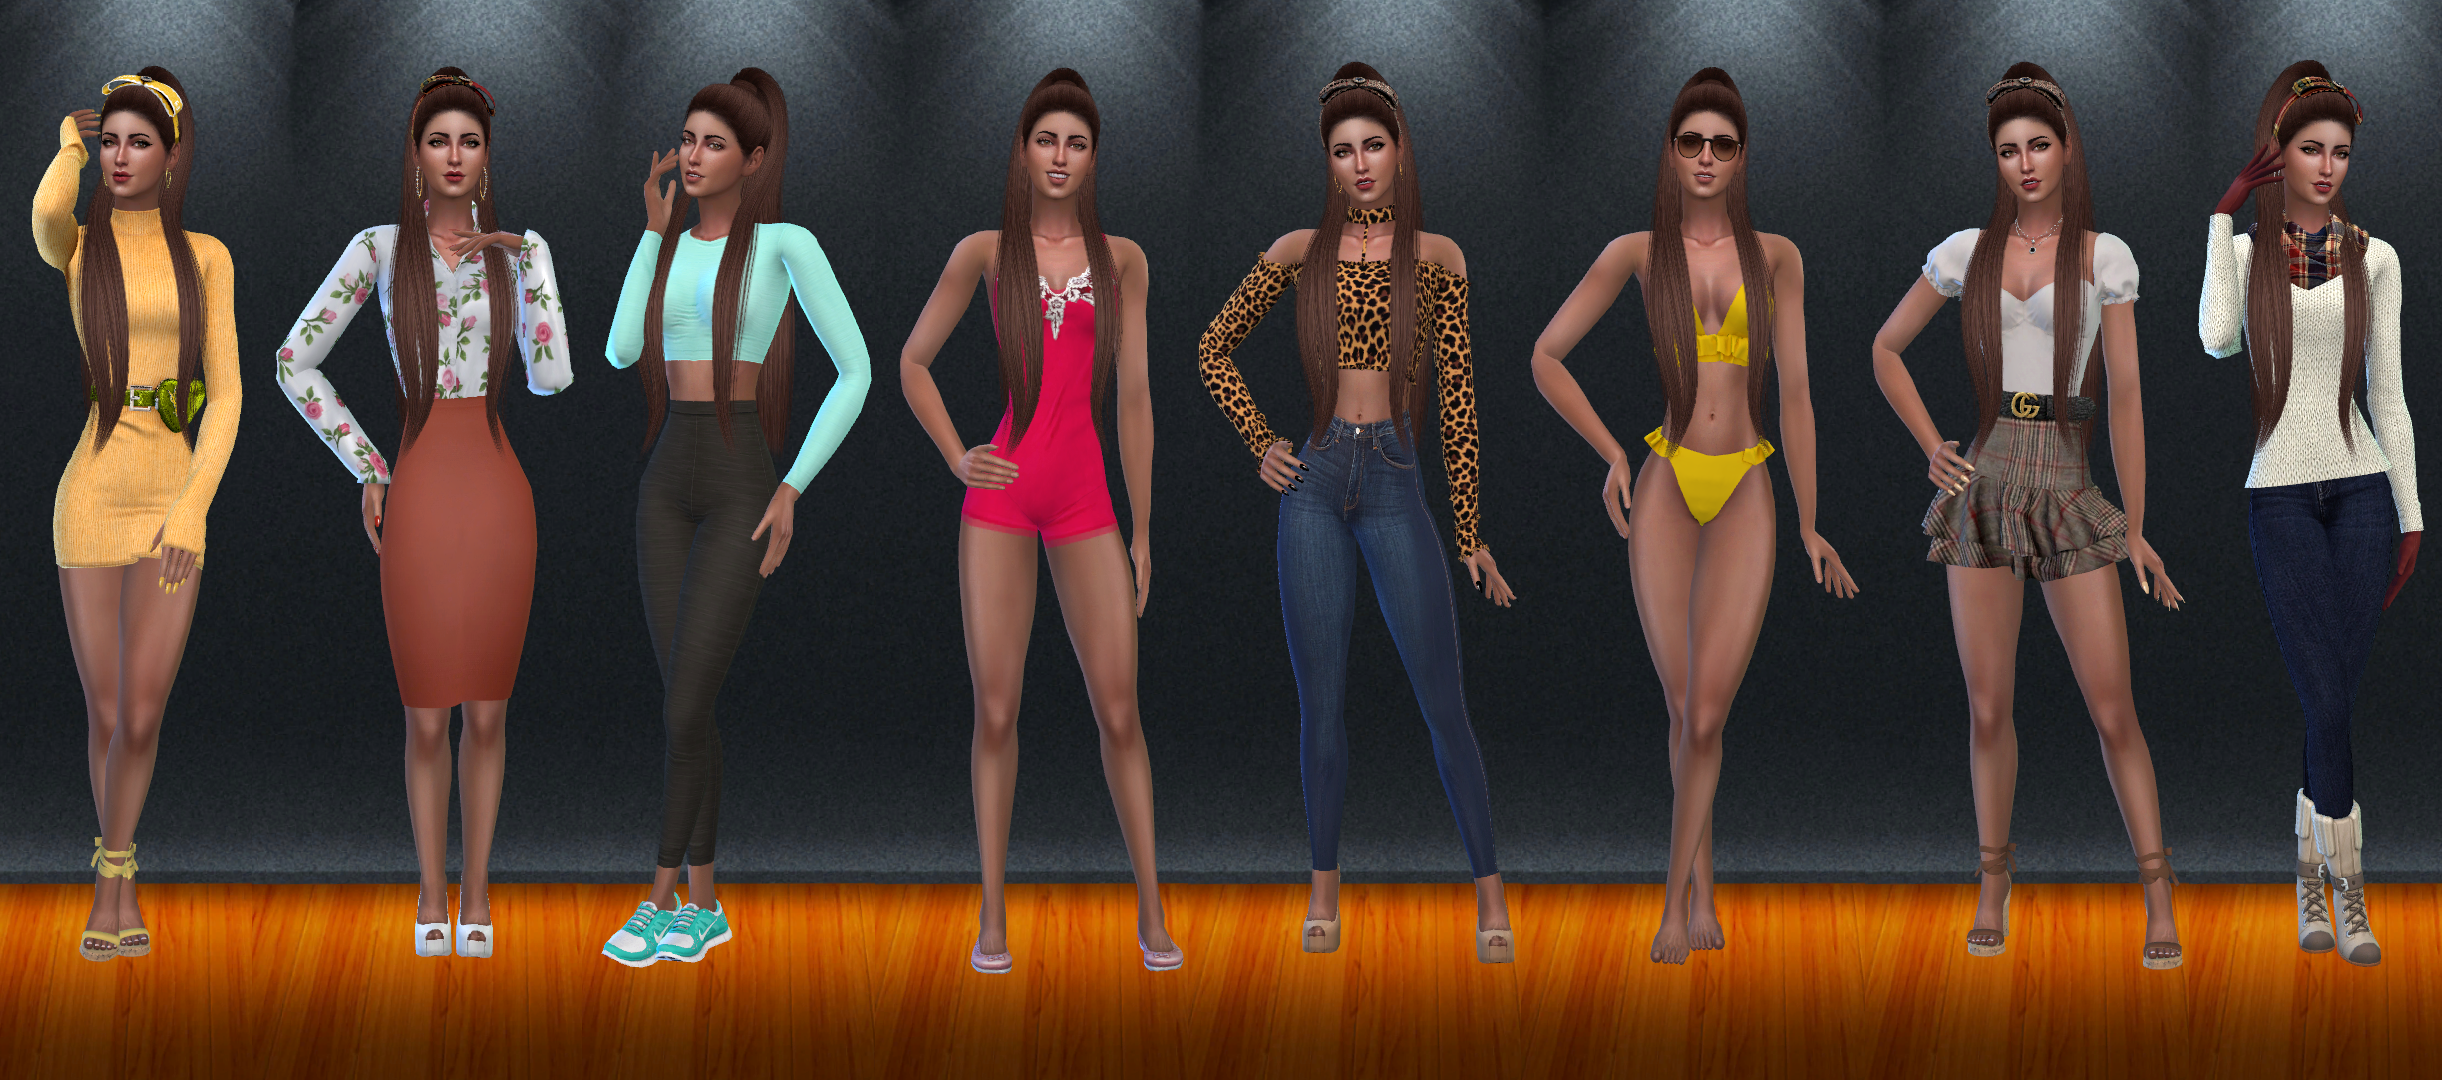 Original Sims By Discovery Sims Page 3 Downloads Cas Sims 